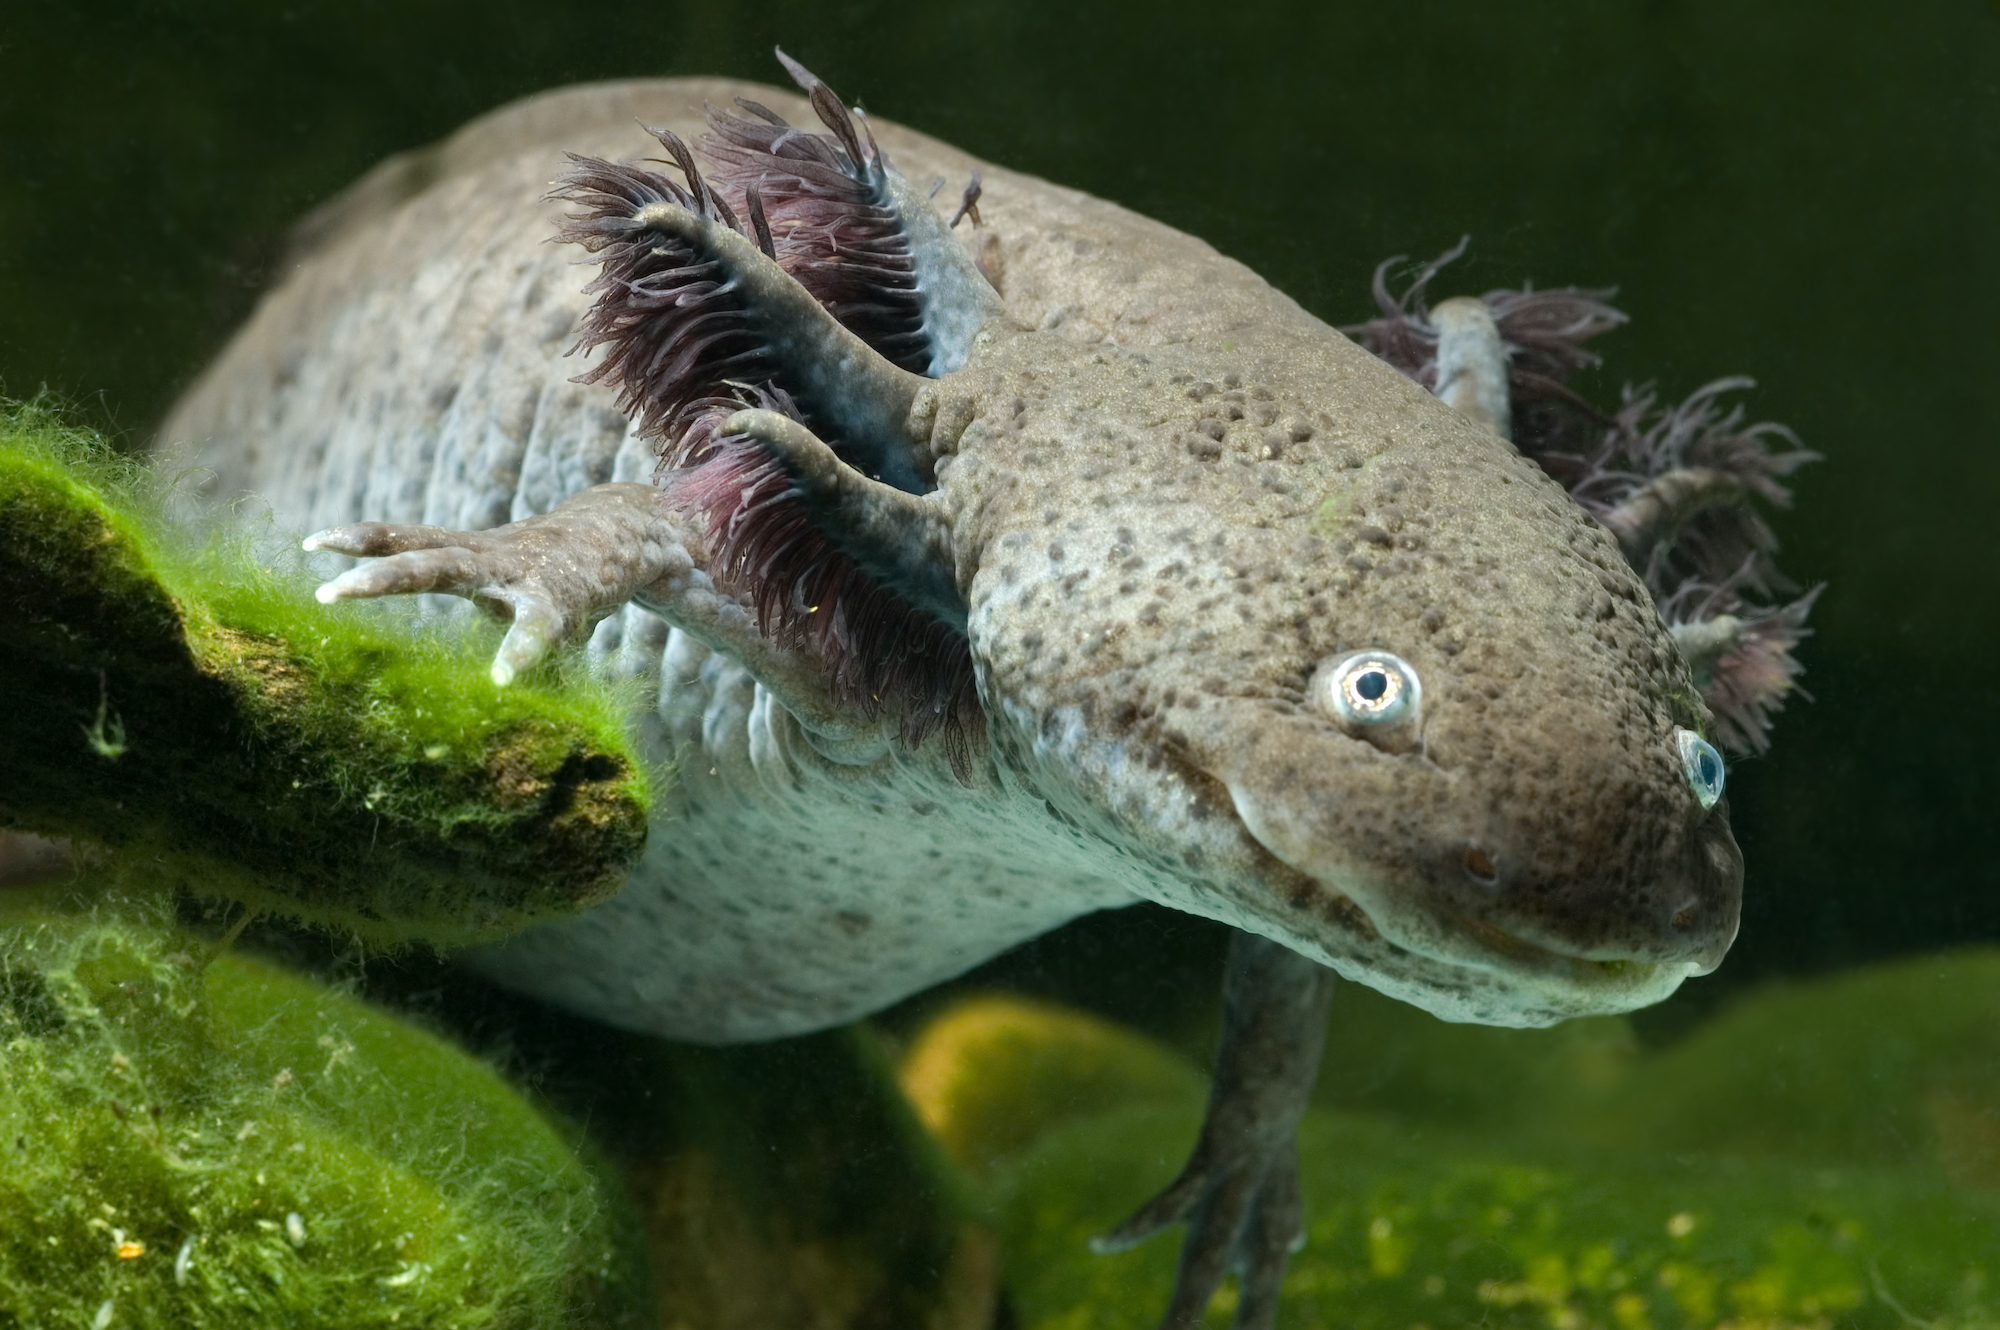 Axolotls guide: what are they, what do they eat, and do they make